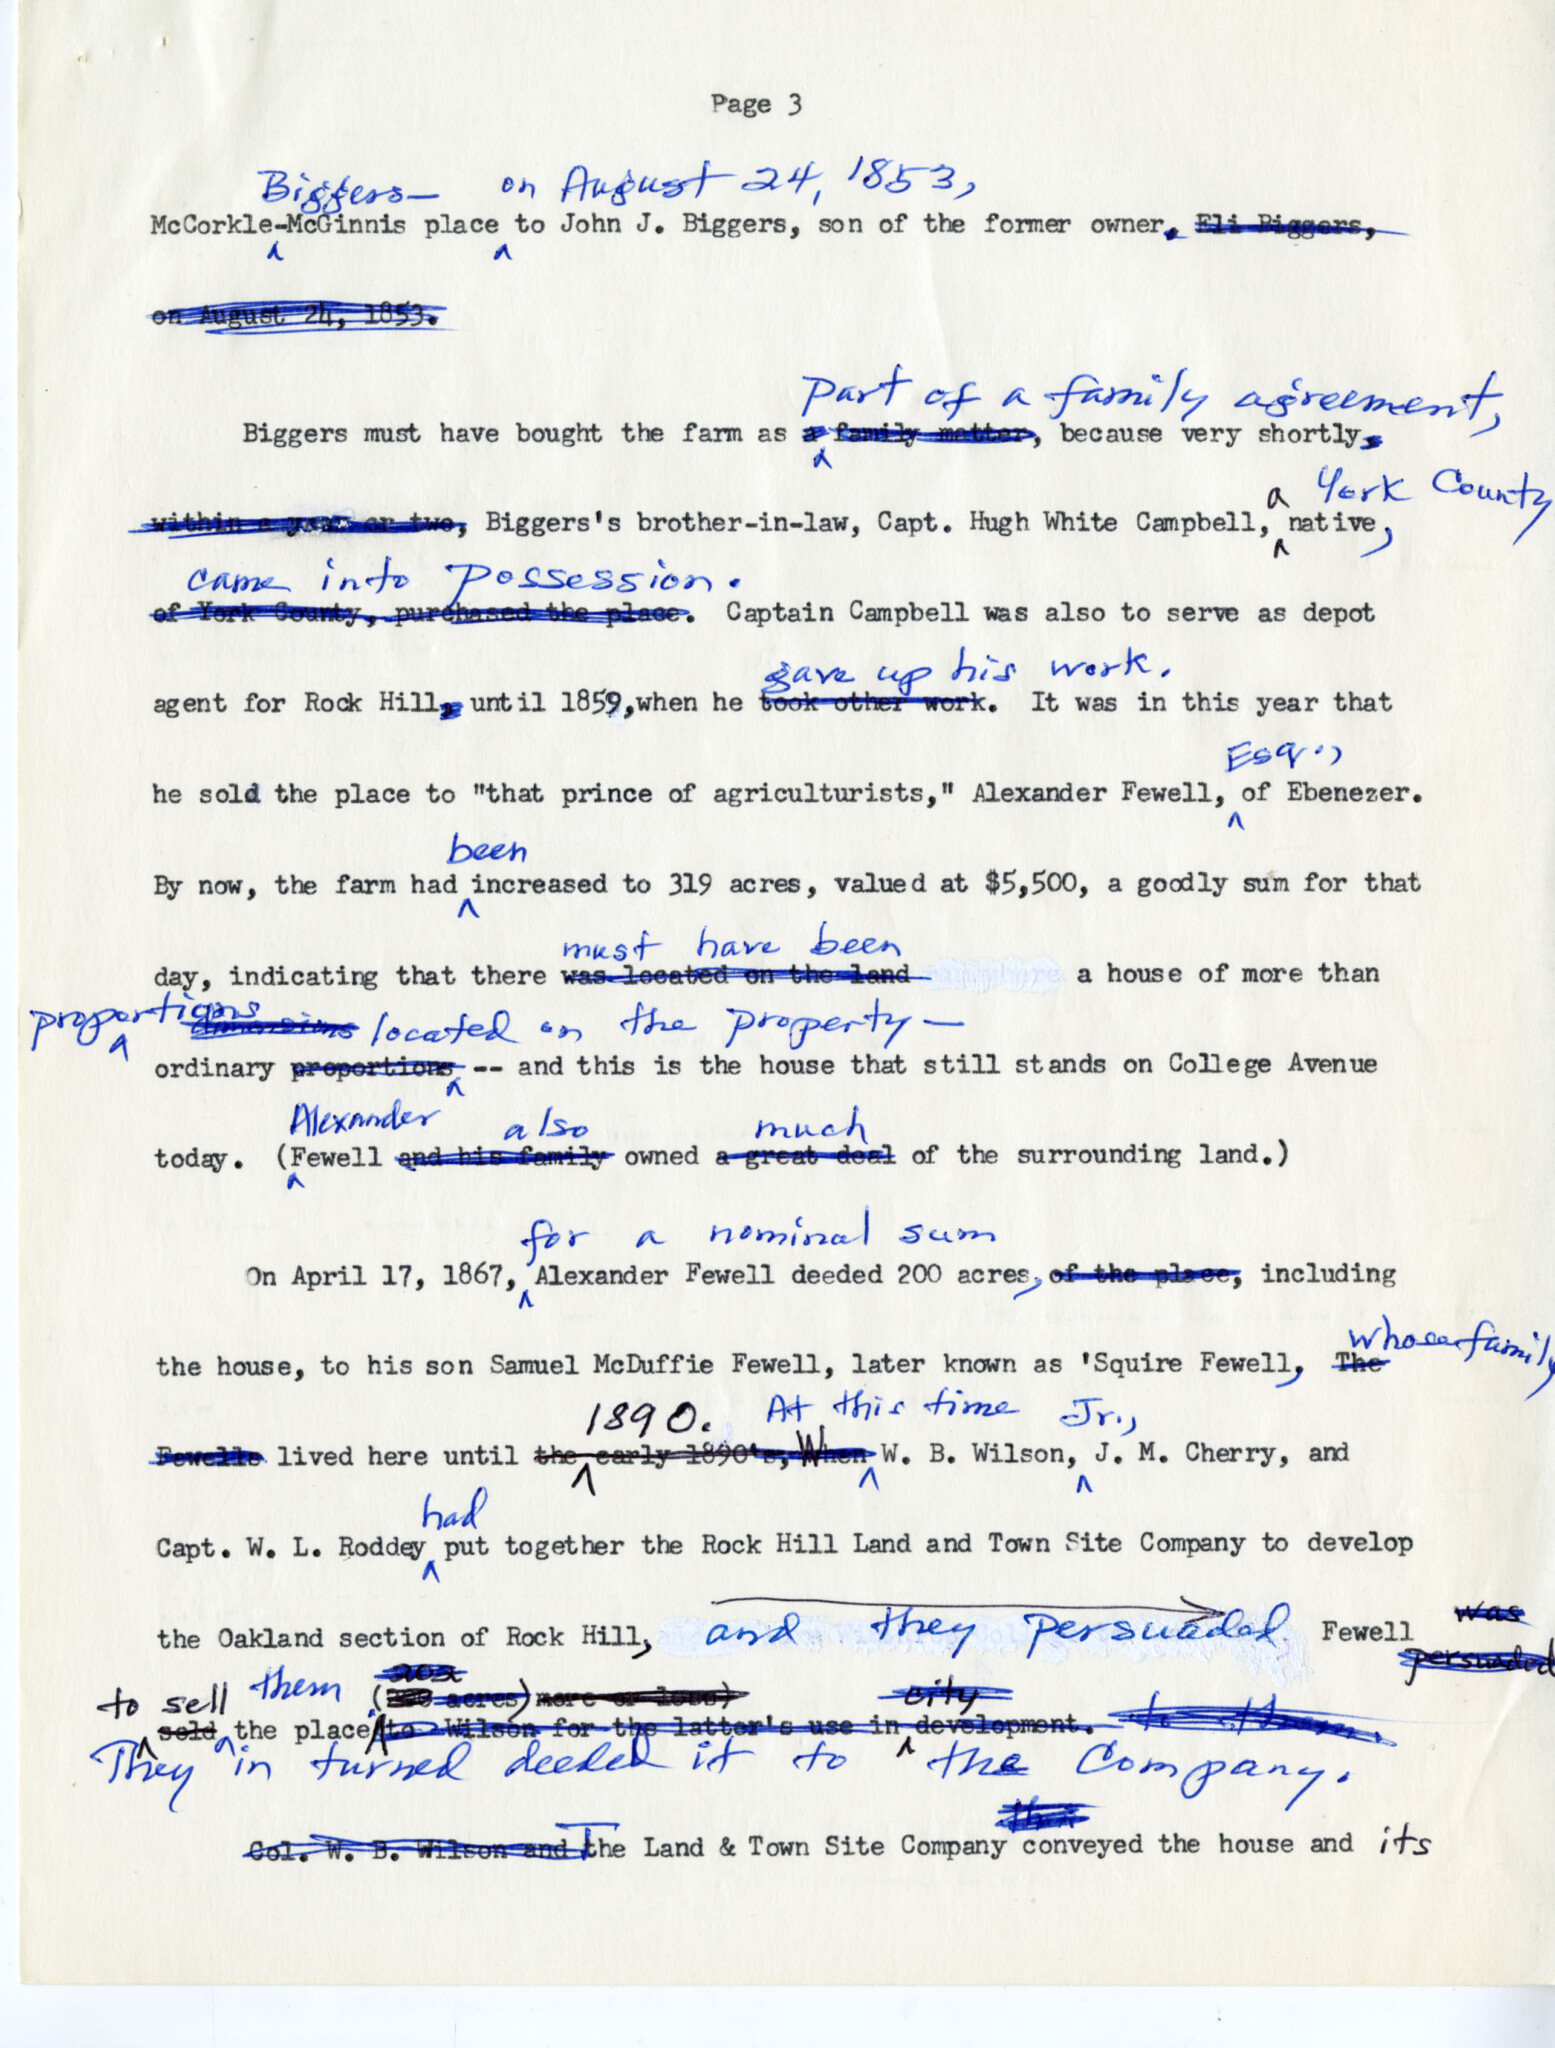 NOTES ON THE HOME BY WM. B. WHITE, JR. P. 3 - WU PETTUS ARCHIVES